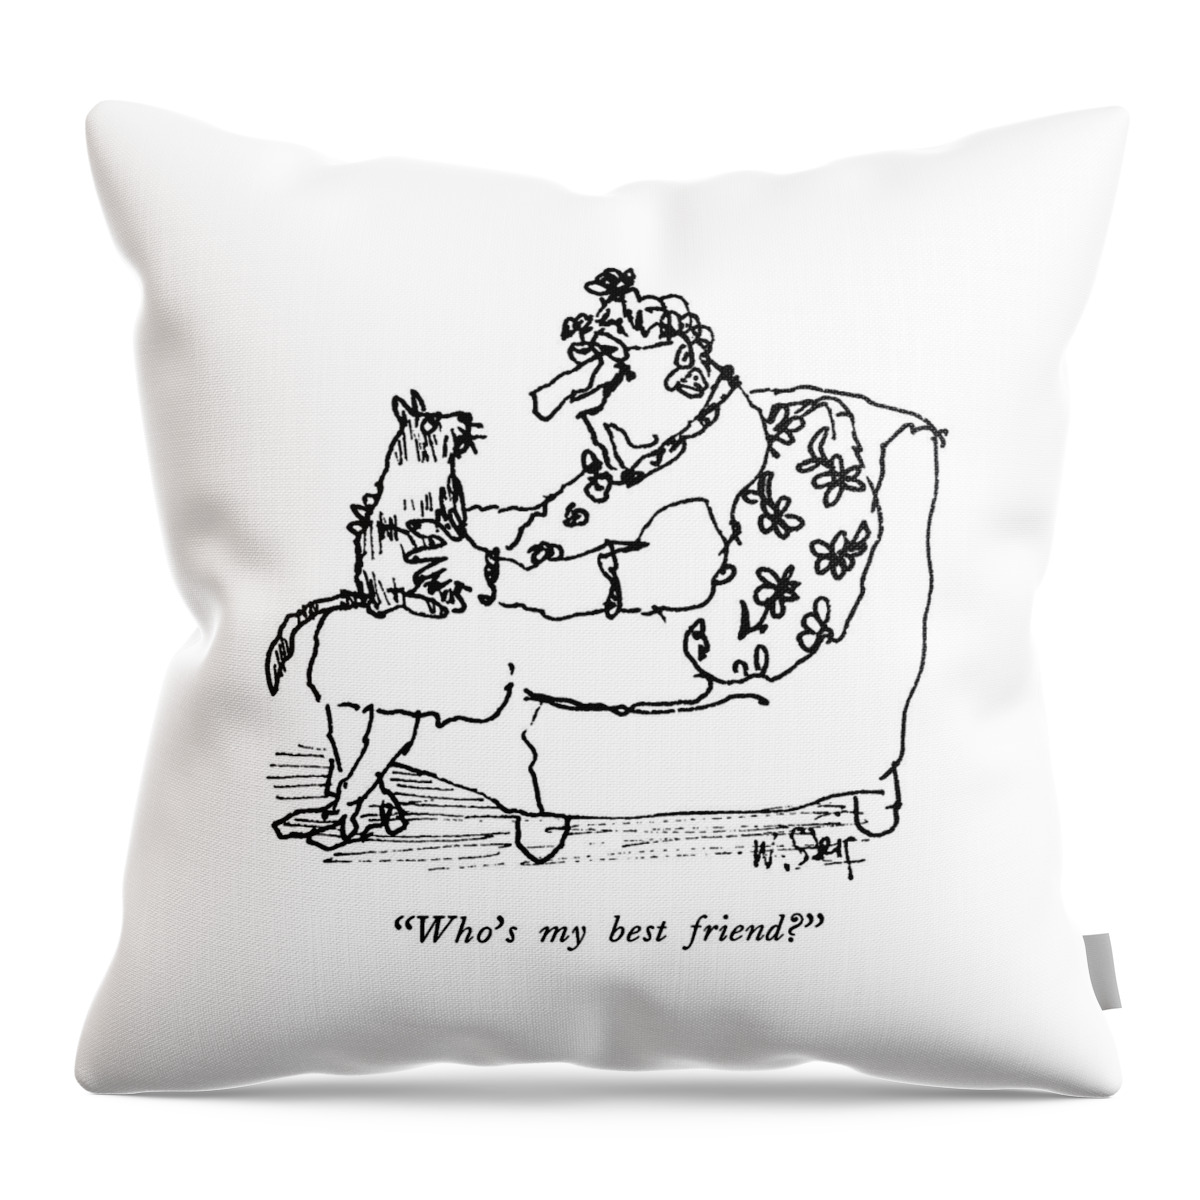 Who's My Best Friend? Throw Pillow